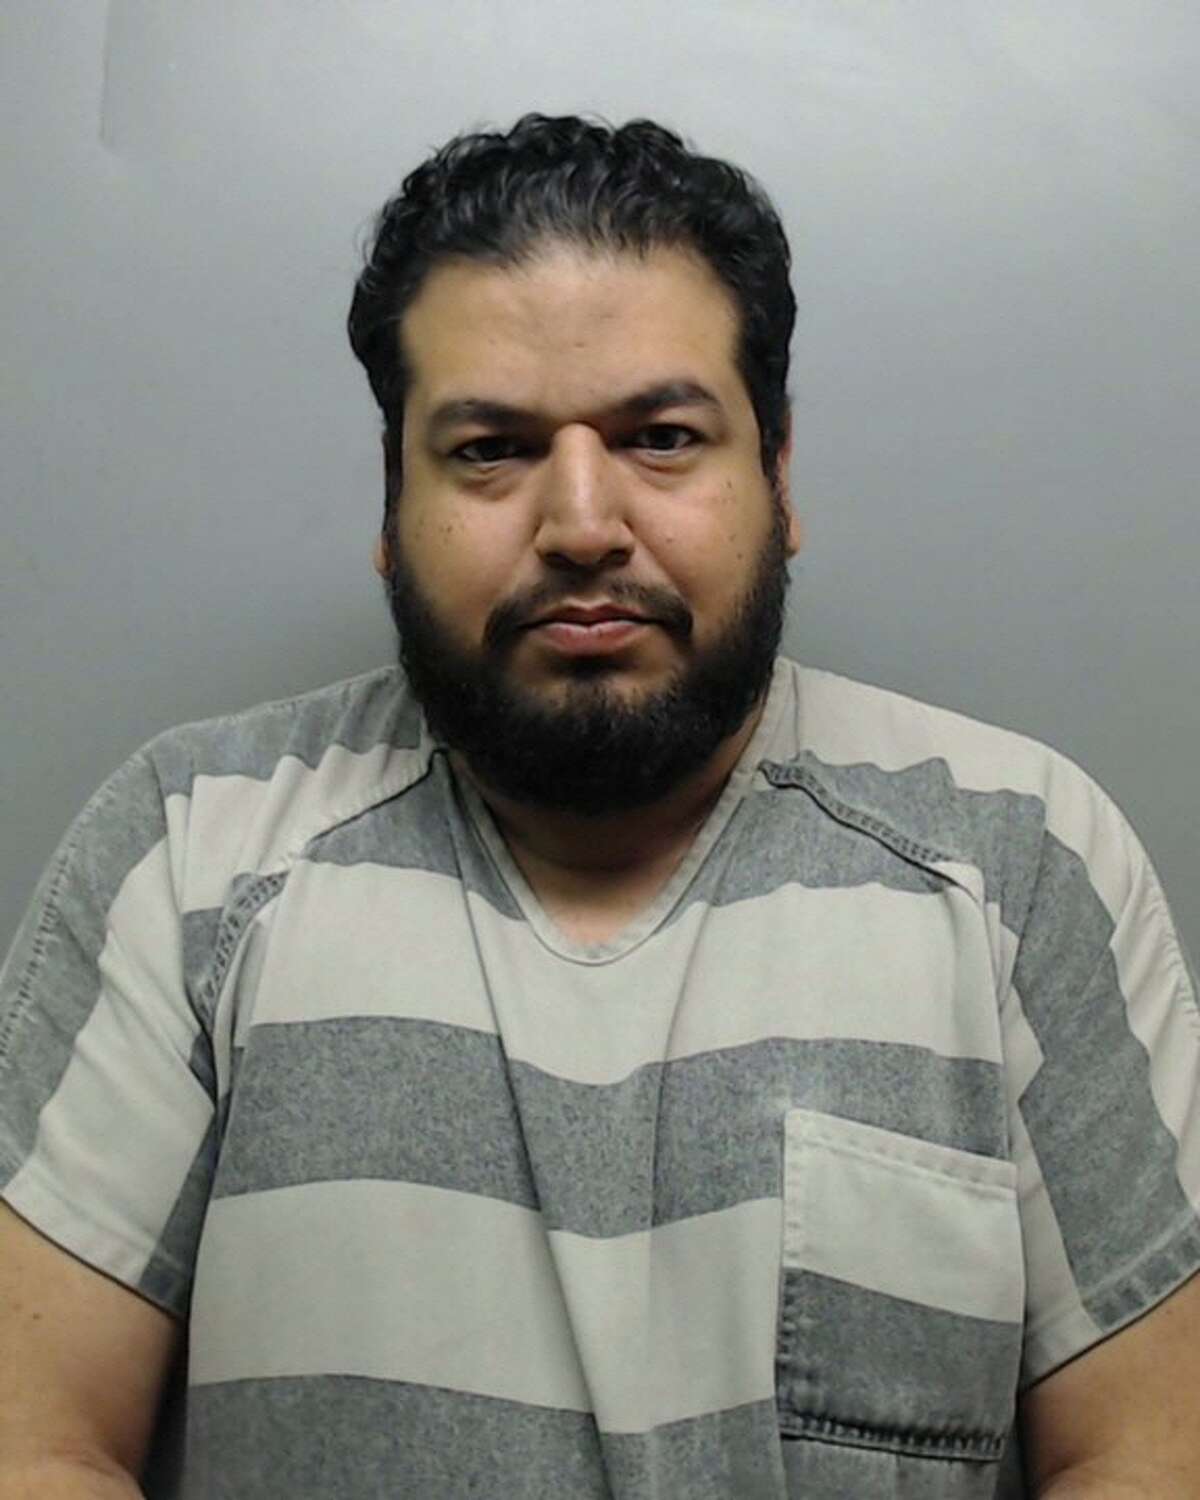 Ruben Guillermo Ulloa, 37, was served with a warrant charging him with sexual assault. He was released on bond from the Webb County Jail the next day.